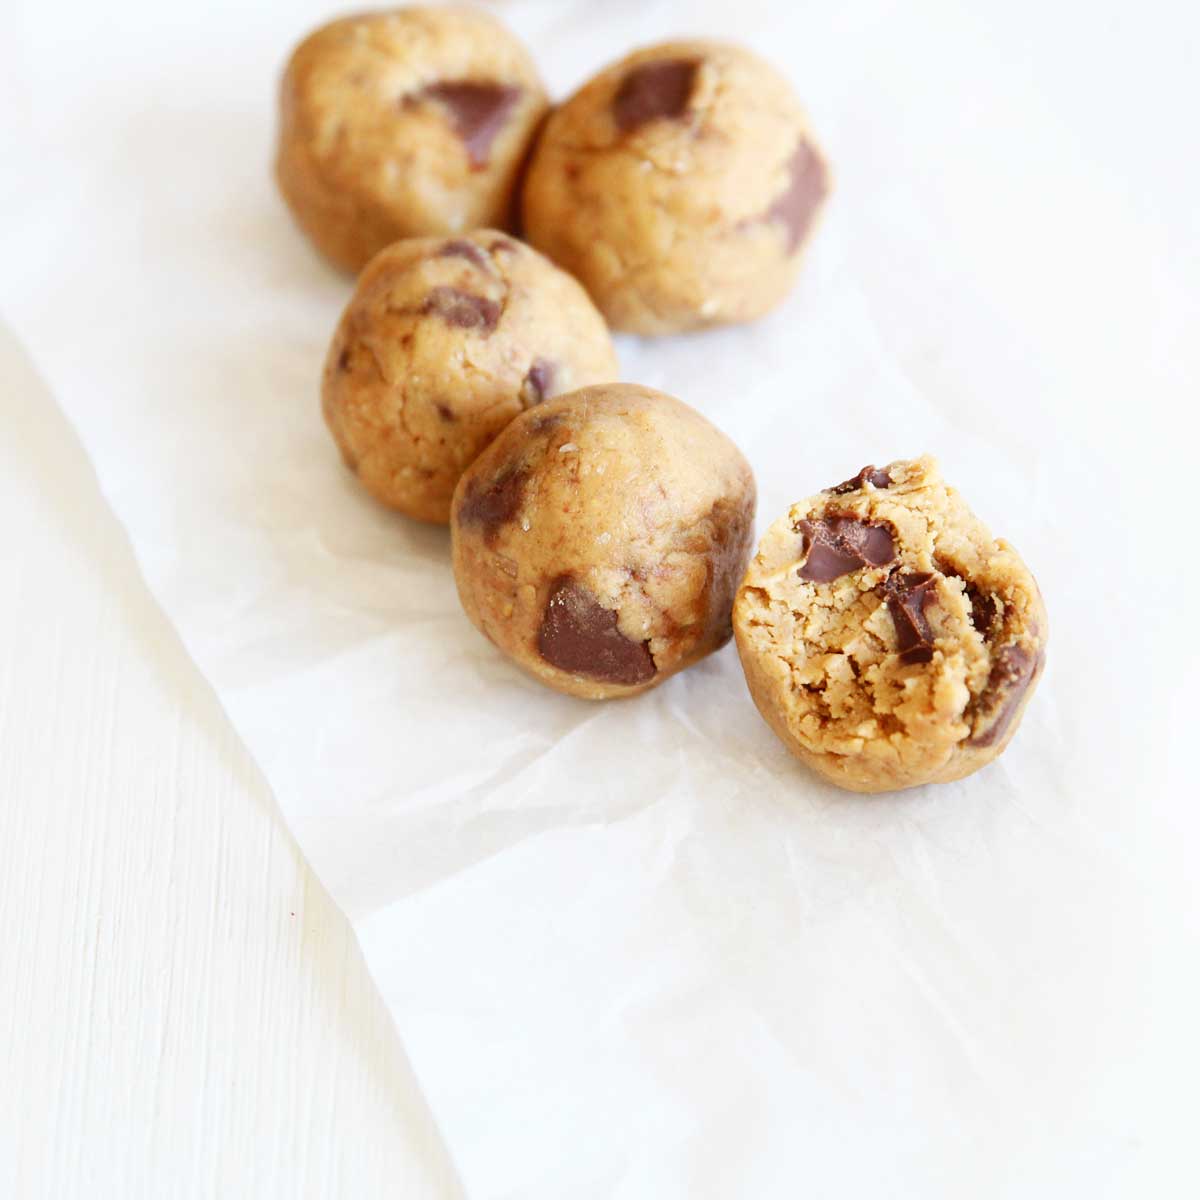 Peanut Butter Cookie Dough Protein Balls (No-Bake, Vegan Recipe with Oats) - Chocolate Protein Balls